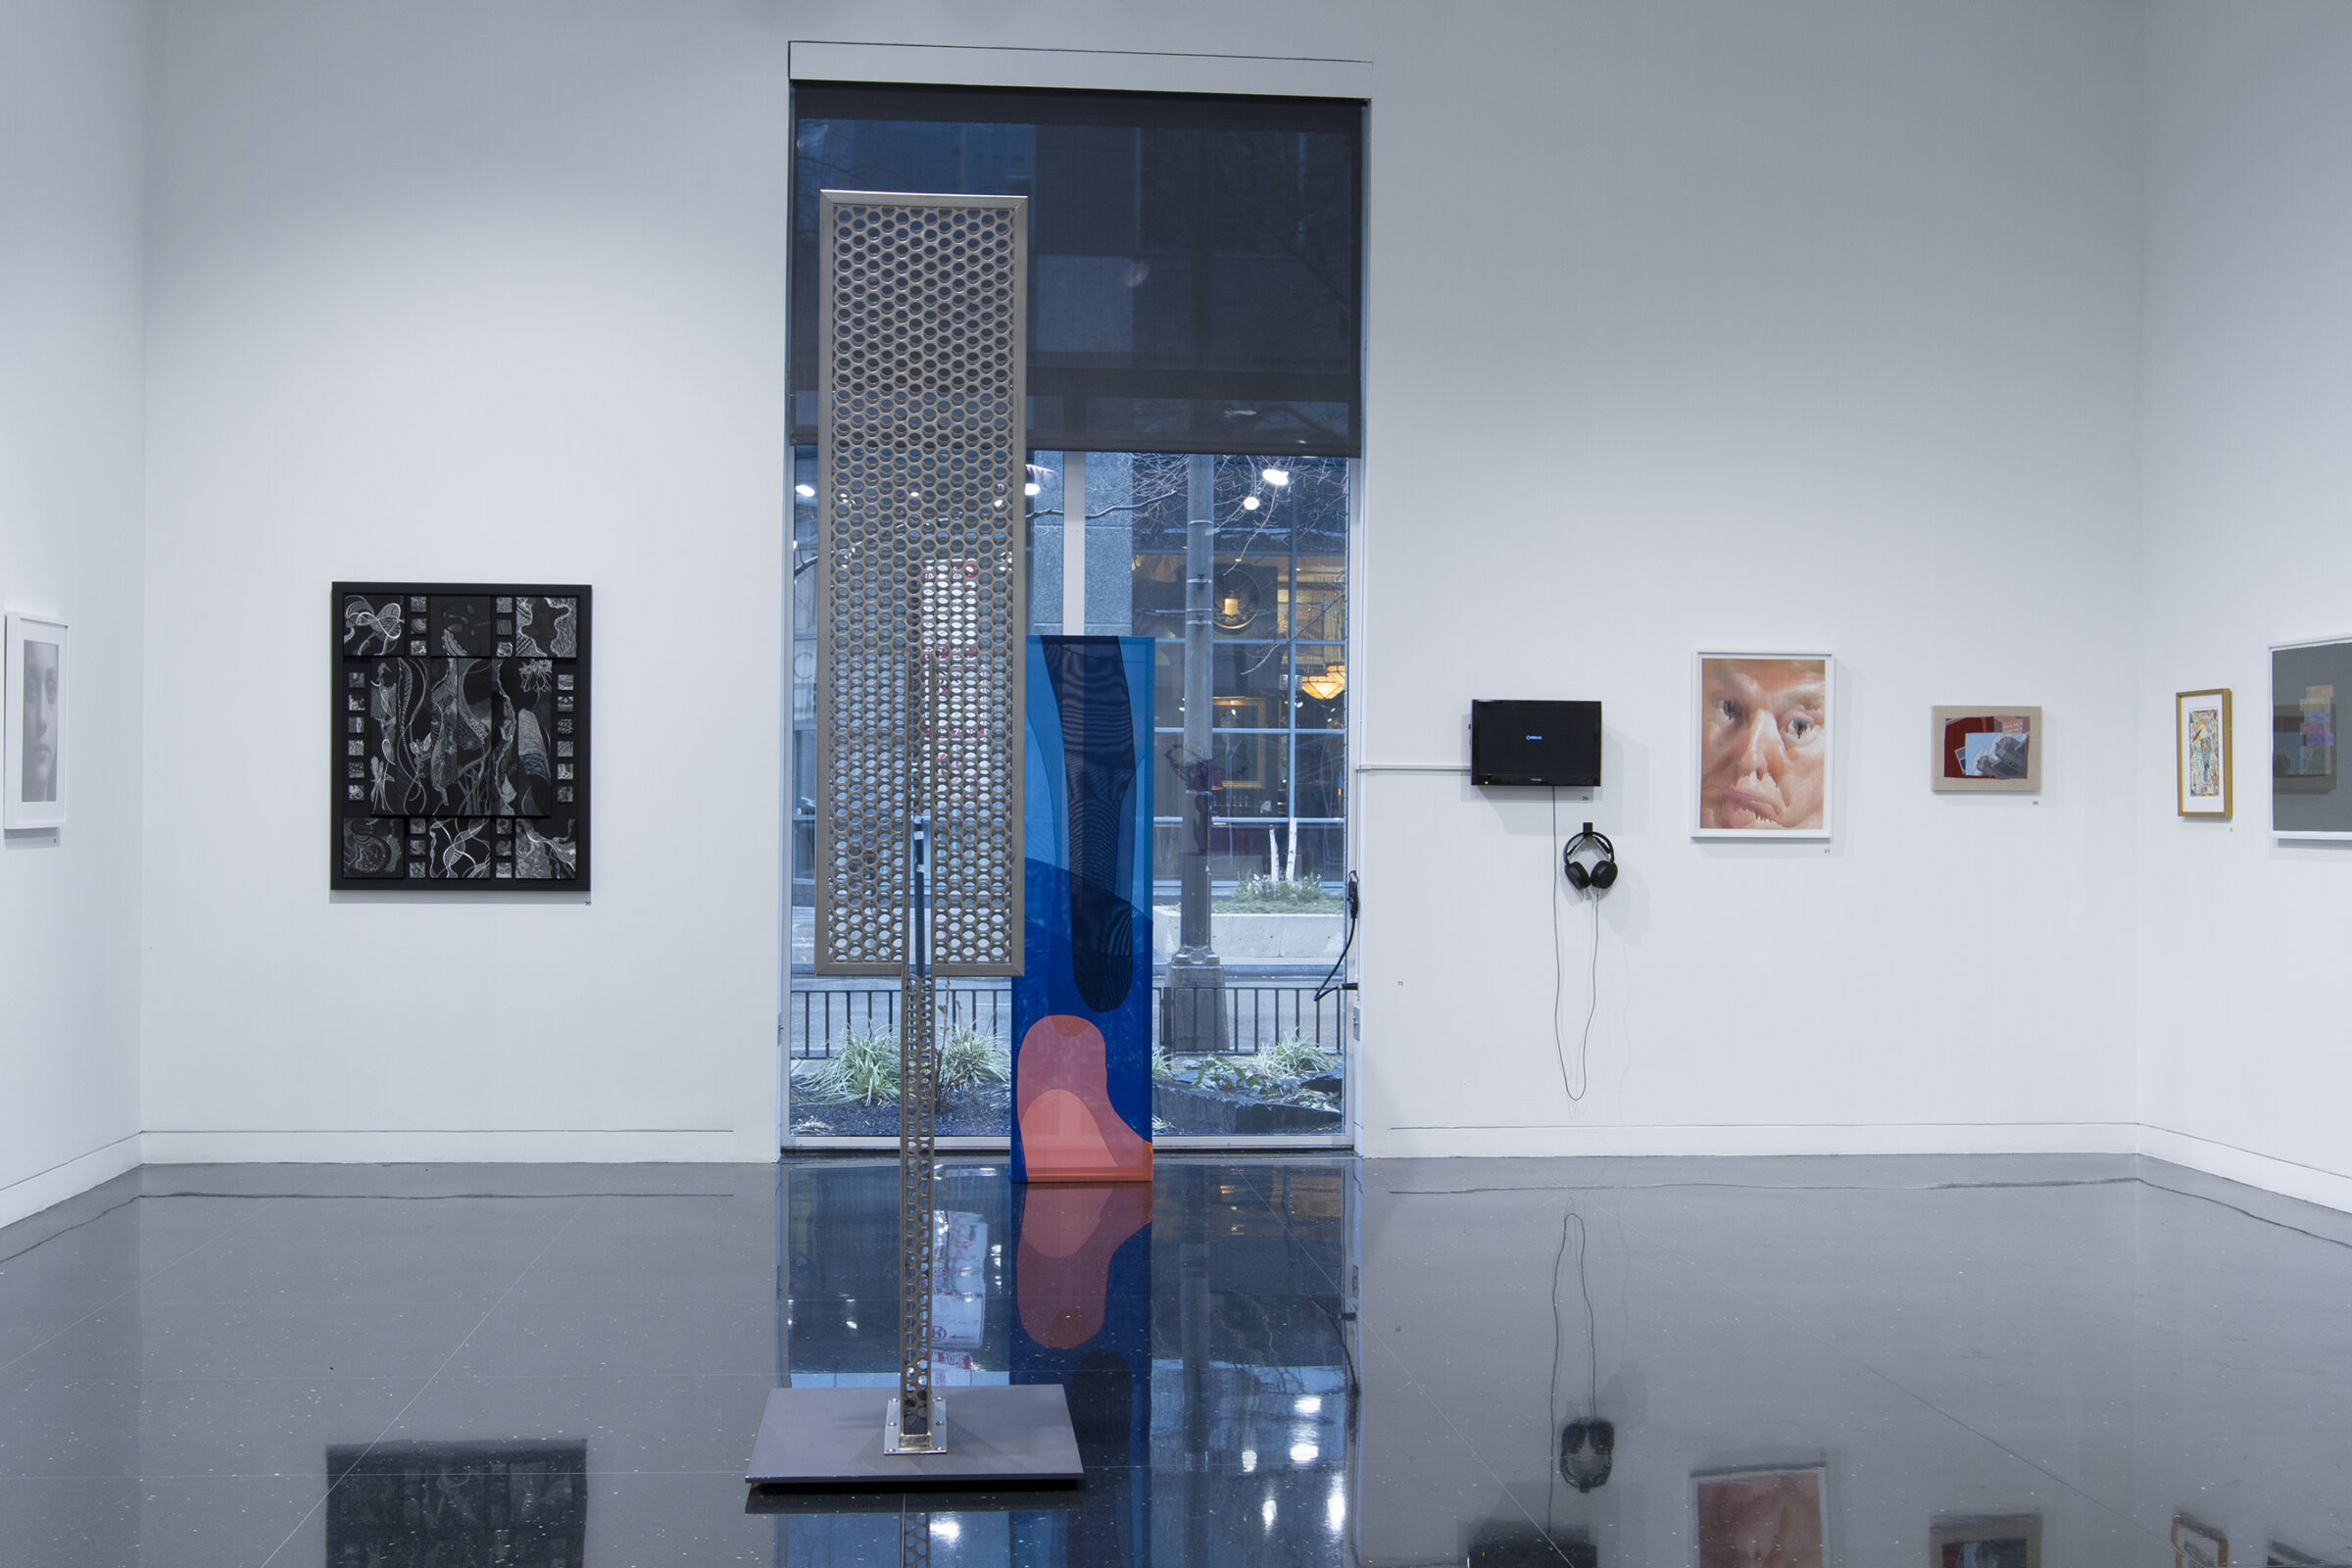 A white-walled gallery with a large window in the center. A colorful abstract fabric sculpture sits in the center of the window, and a large metal sculpture perforated by a grid of holes stands in the gallery closest to the viewer.